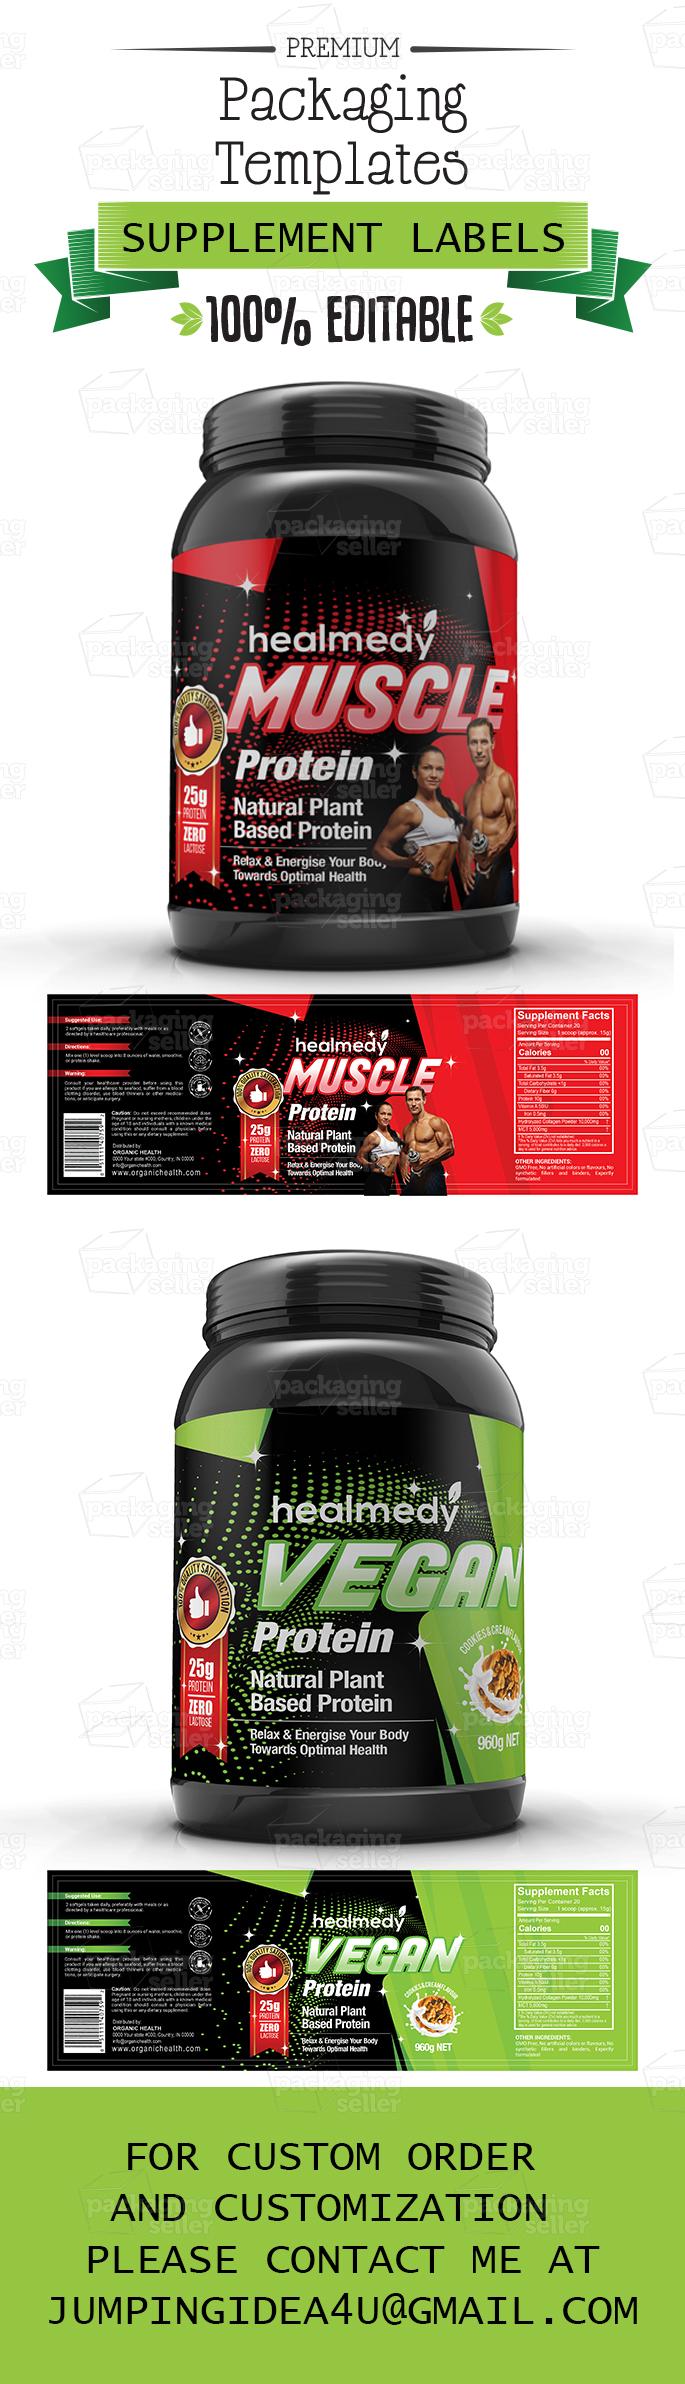 supplement-label-template-ji-48-packaging-design-company-product-packaging-design-agency